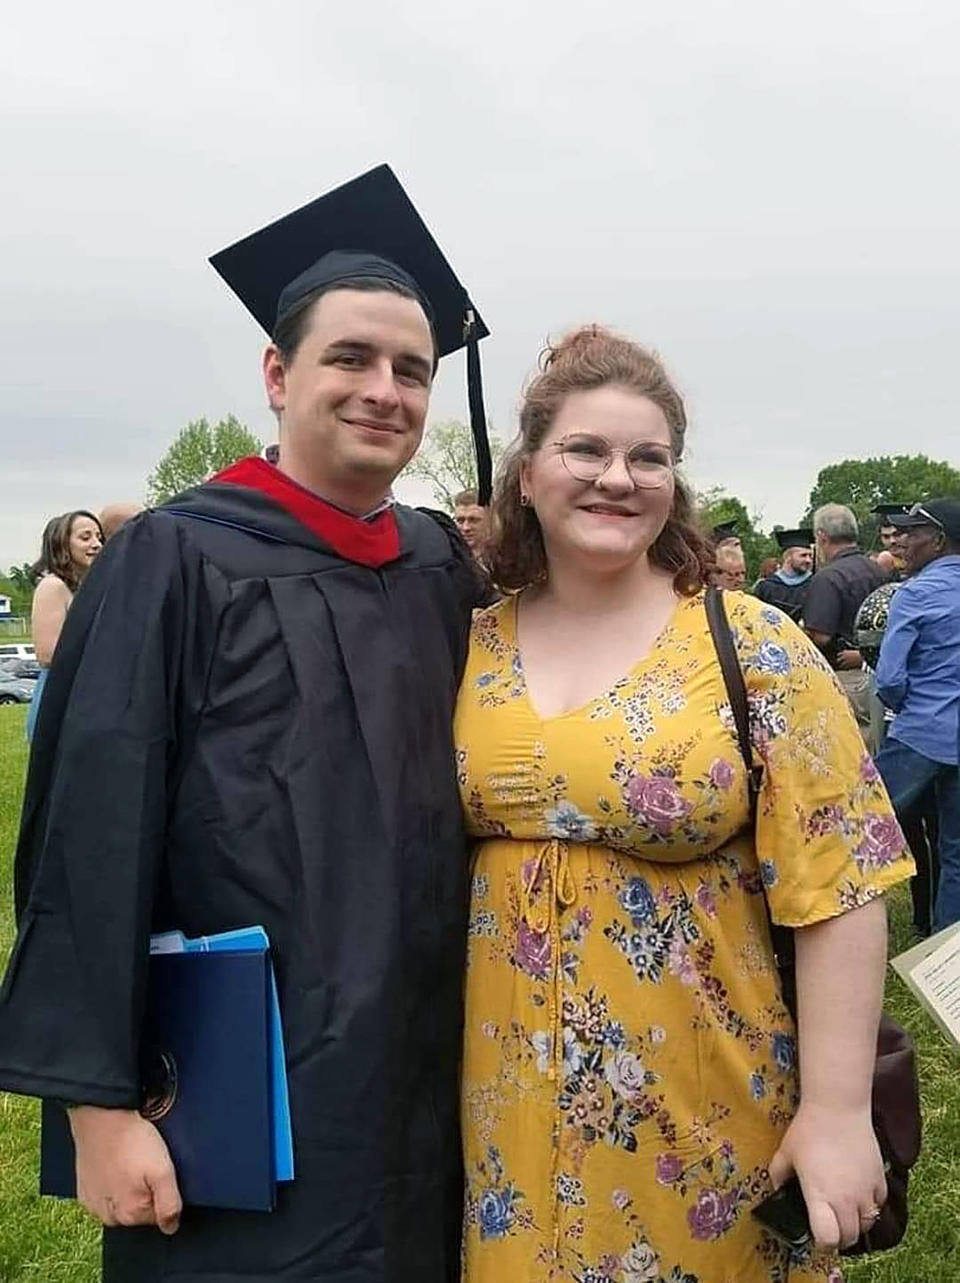 In this image provided by Sydnee Shipley, Jared Shipley poses for a photo with his wife, Sydnee, at his graduation from Ohio Valley University in Vienna, W.Va. in 2019. Shipley, who studied to become a preacher at the Christian university, struggled to find work after he was unable to access his transcript records, which the school said were deleted from its database after the system was hacked following the announcement of its closure in December 2021. (Sydnee Shipley via AP)